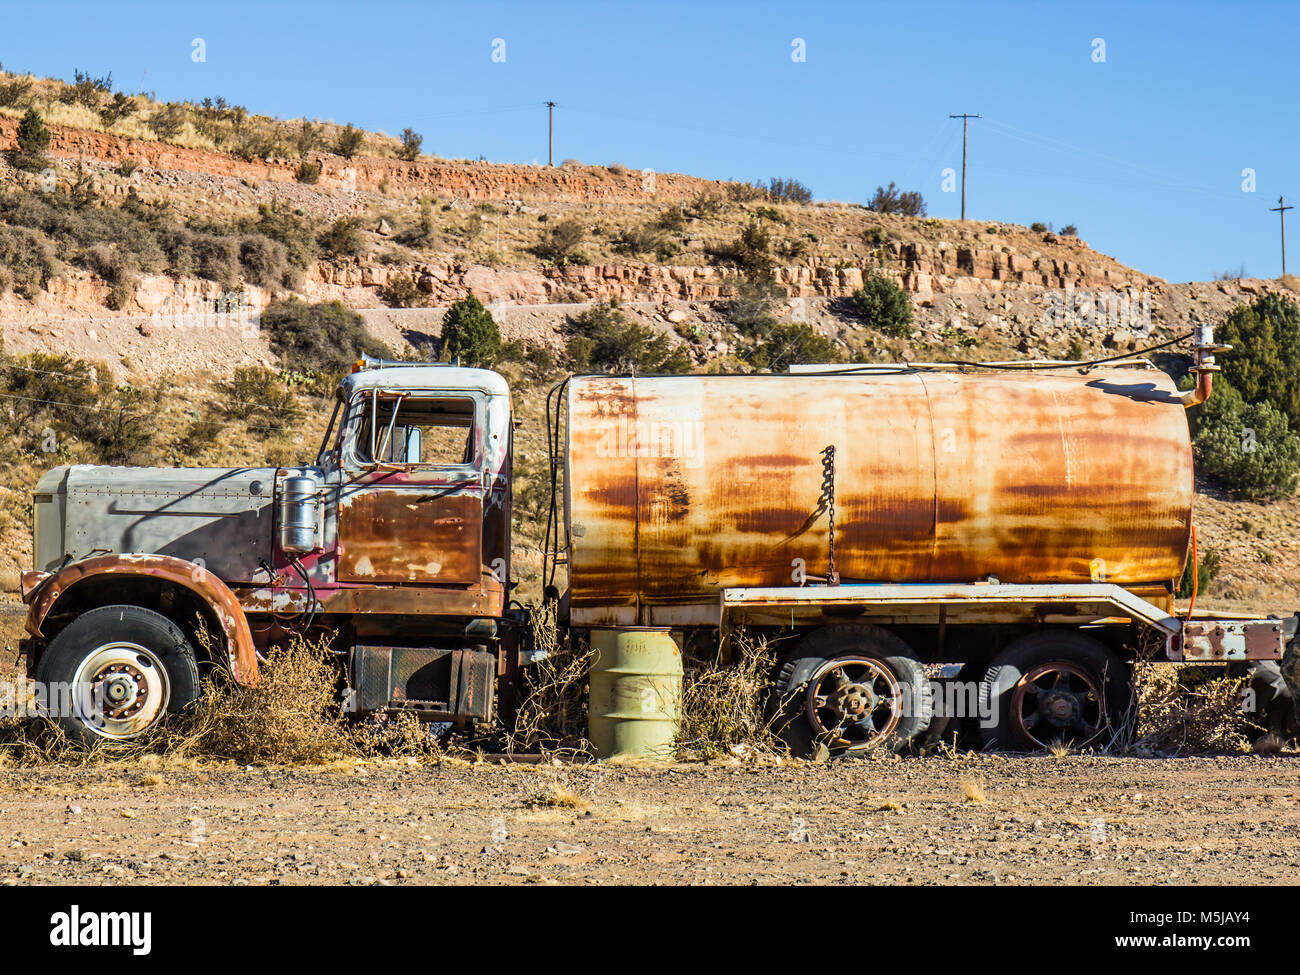 Vintage Rusted Water Tank Truck In Salvage Yard Stock Photo